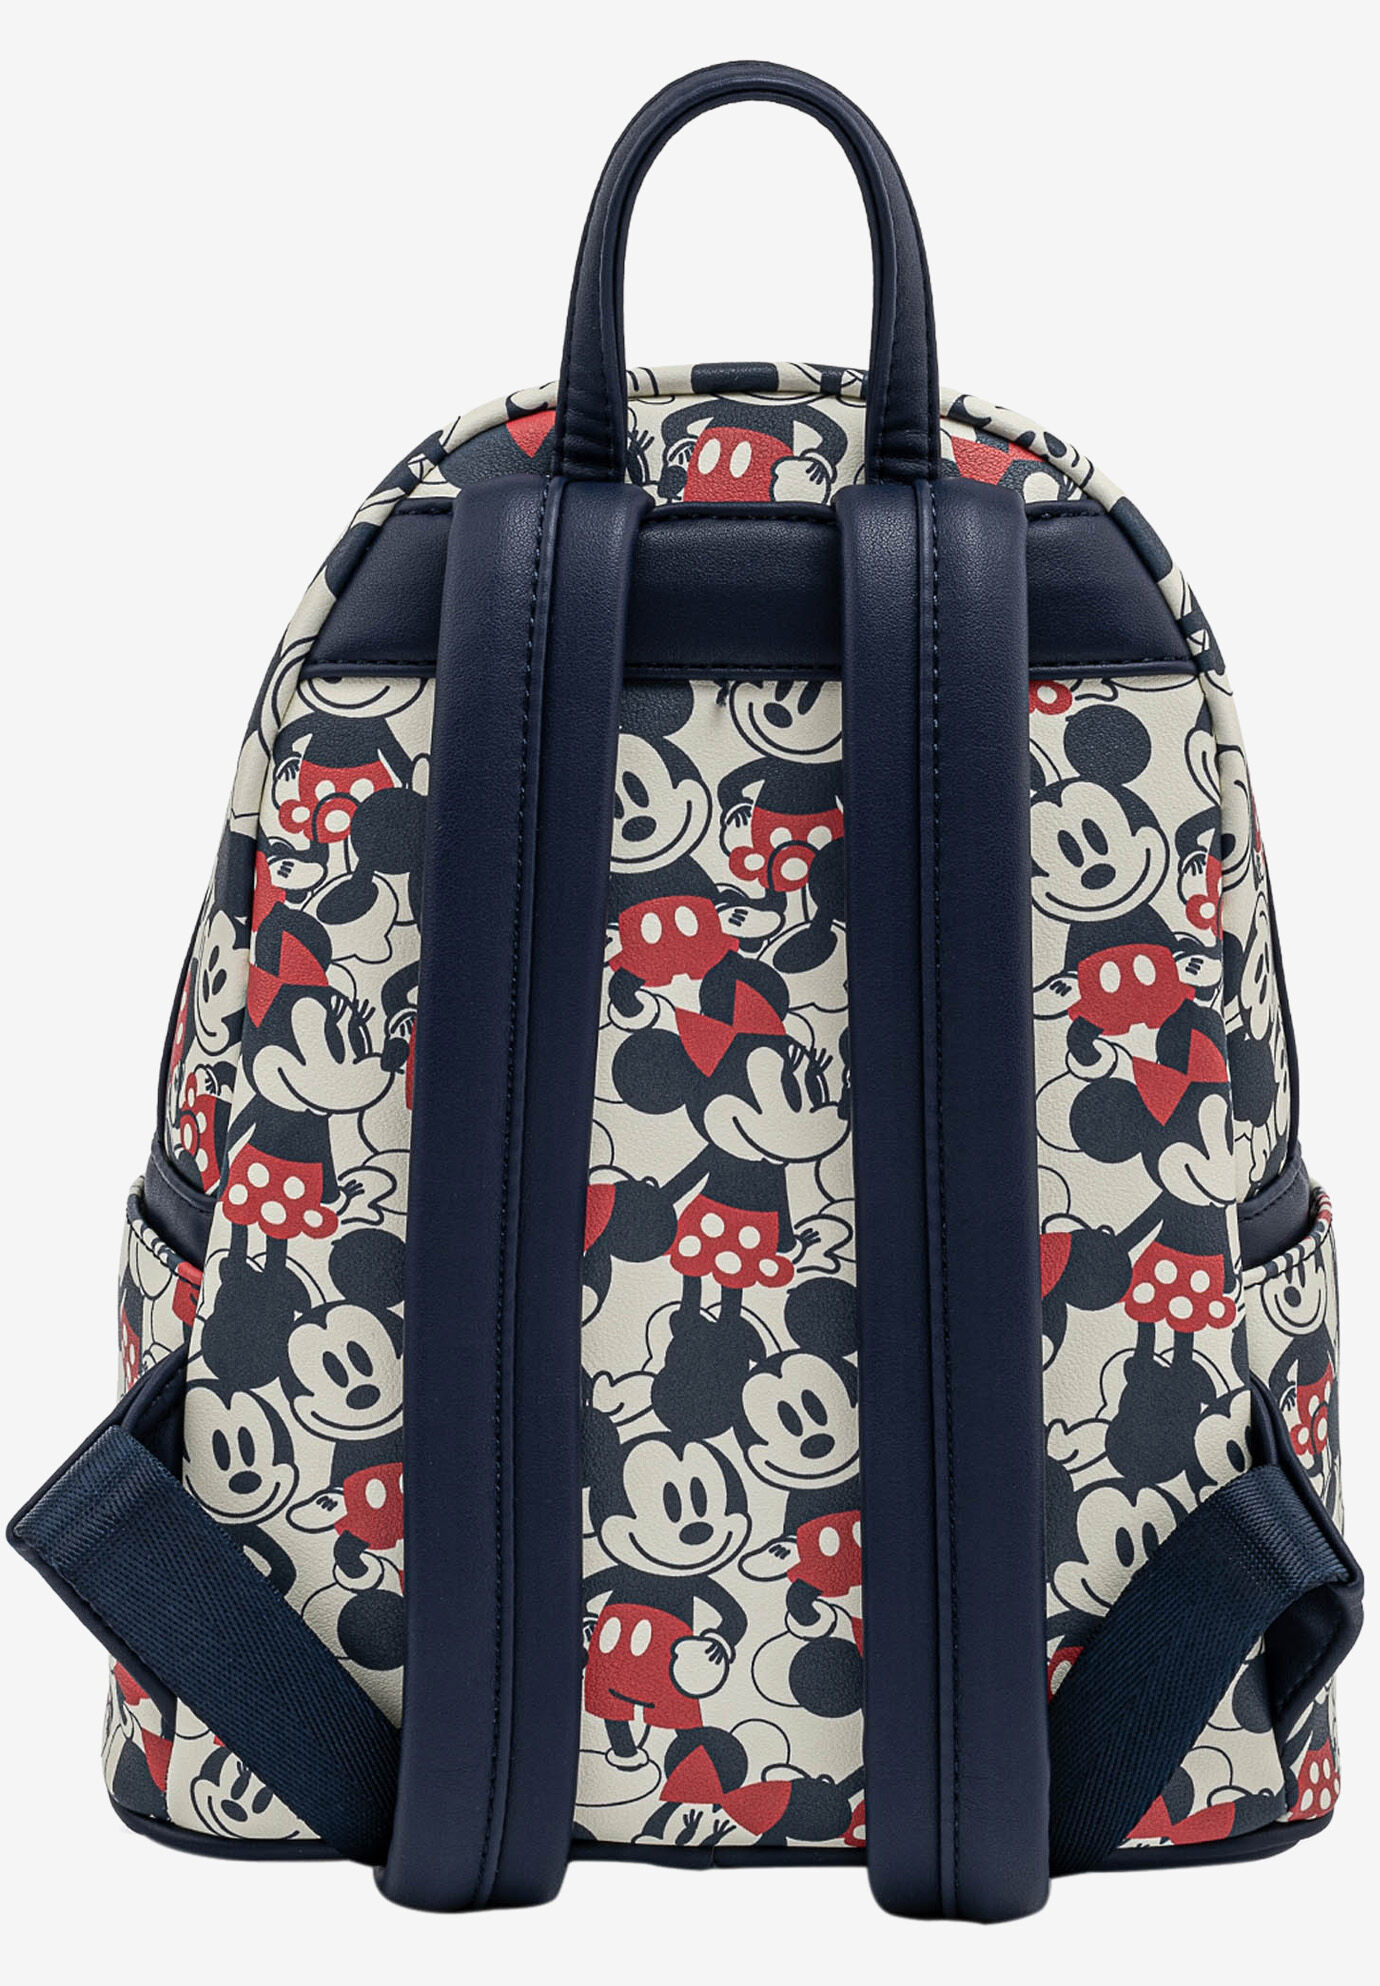 Disney x Coach Keith Haring Mickey Mouse Backpack in Black & White Sam –  Essex Fashion House